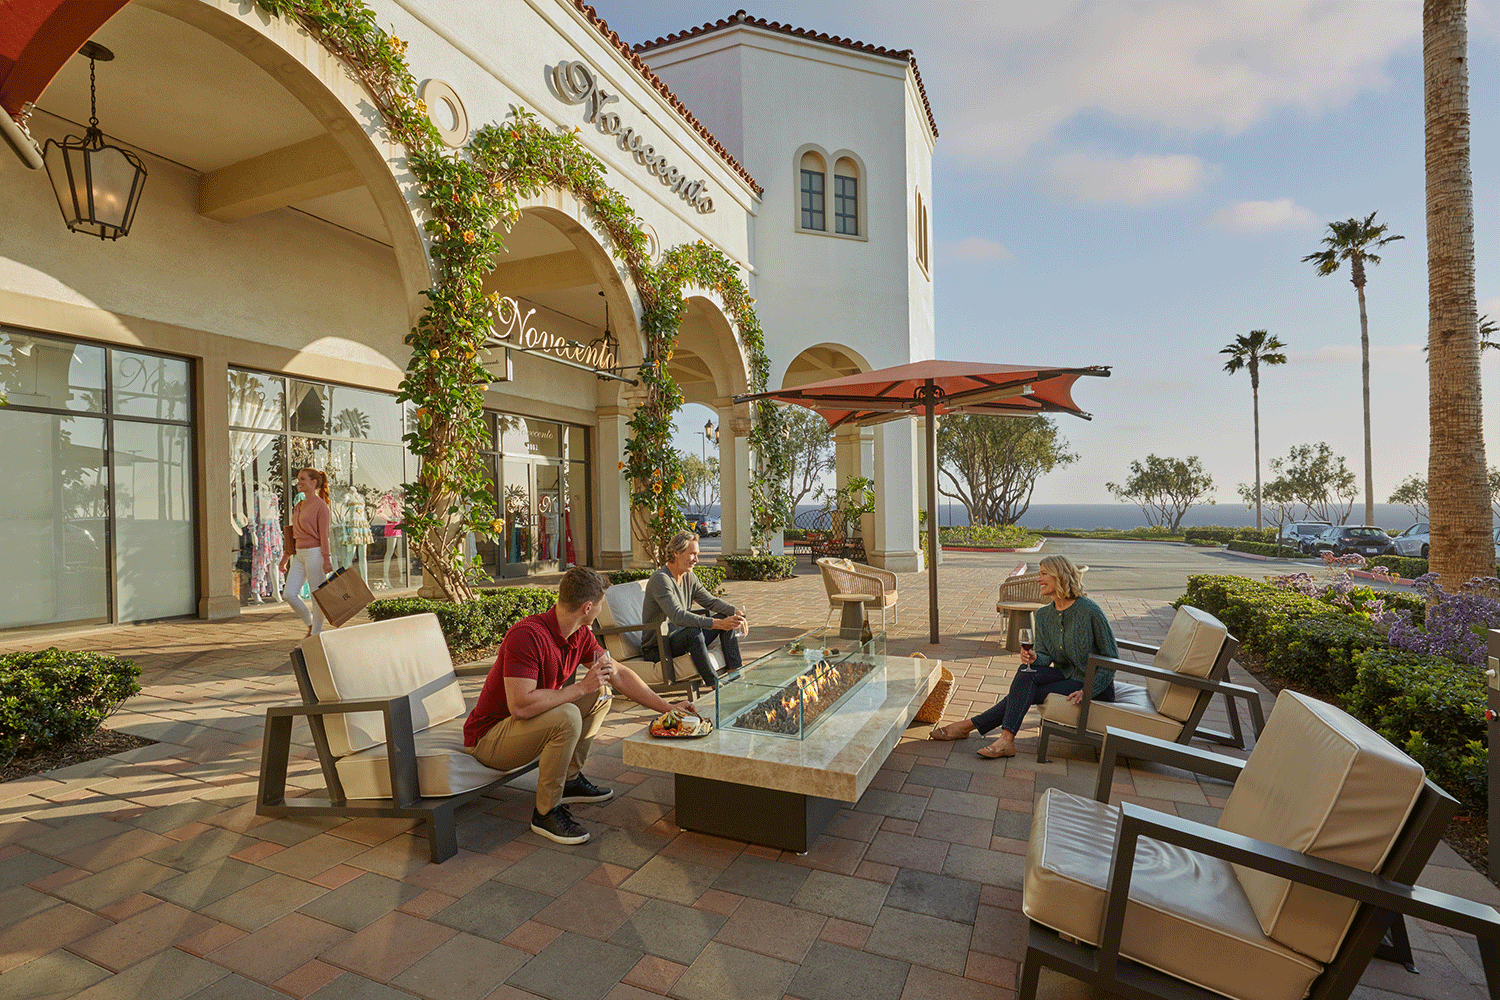  View of family talking at Crystal Cove Shopping Center 